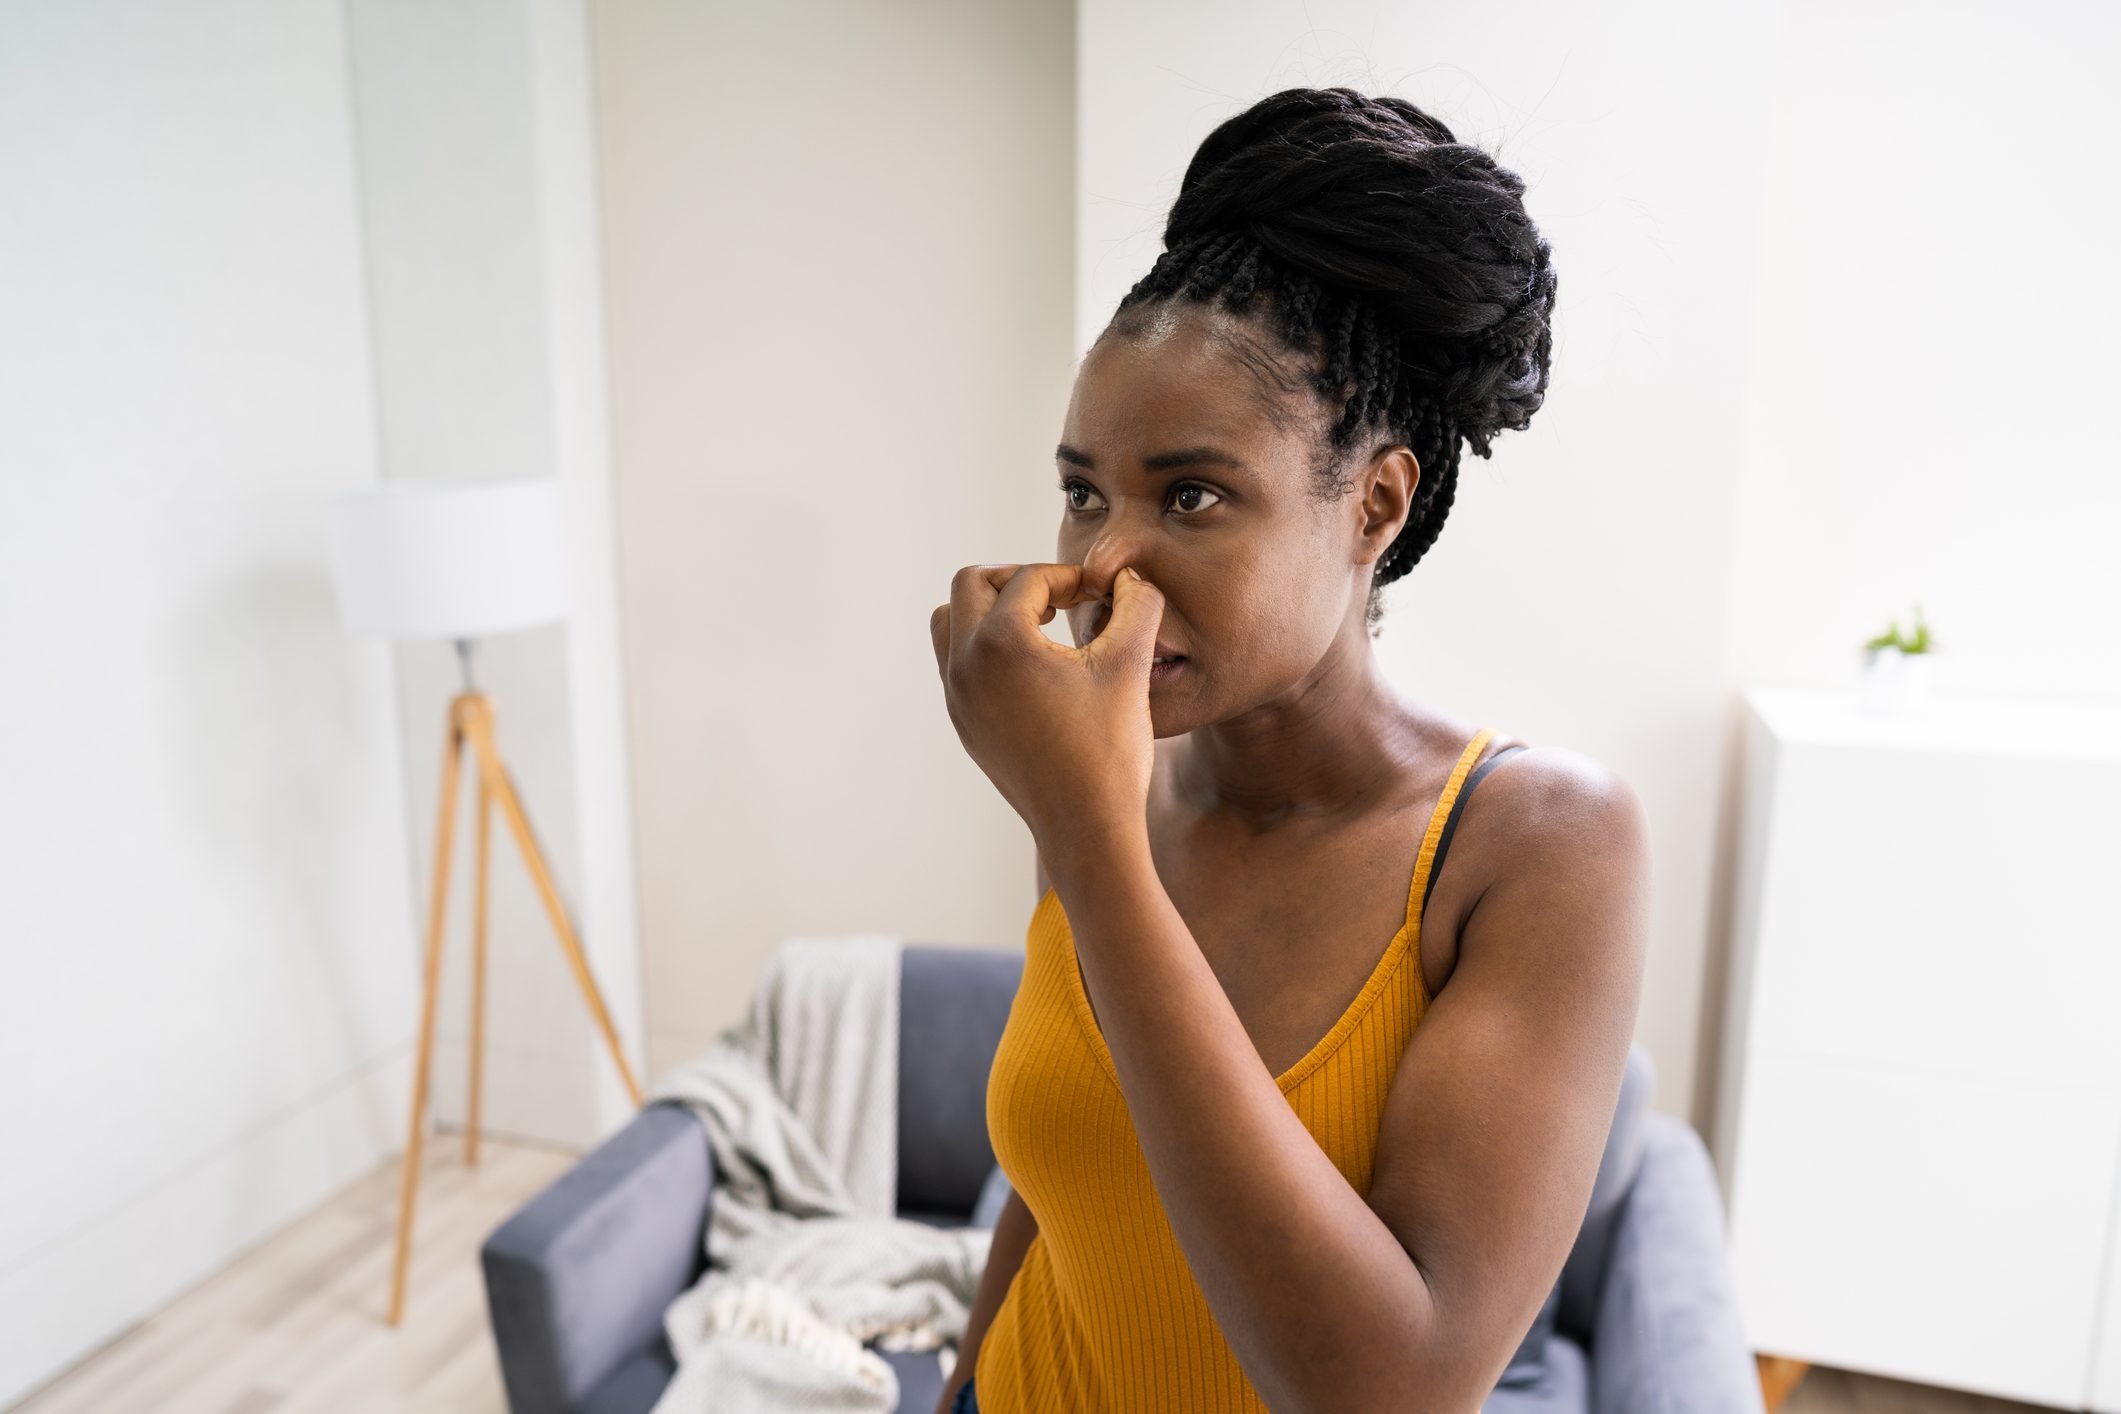 Simple Remedies For Musty Smells In Your Home